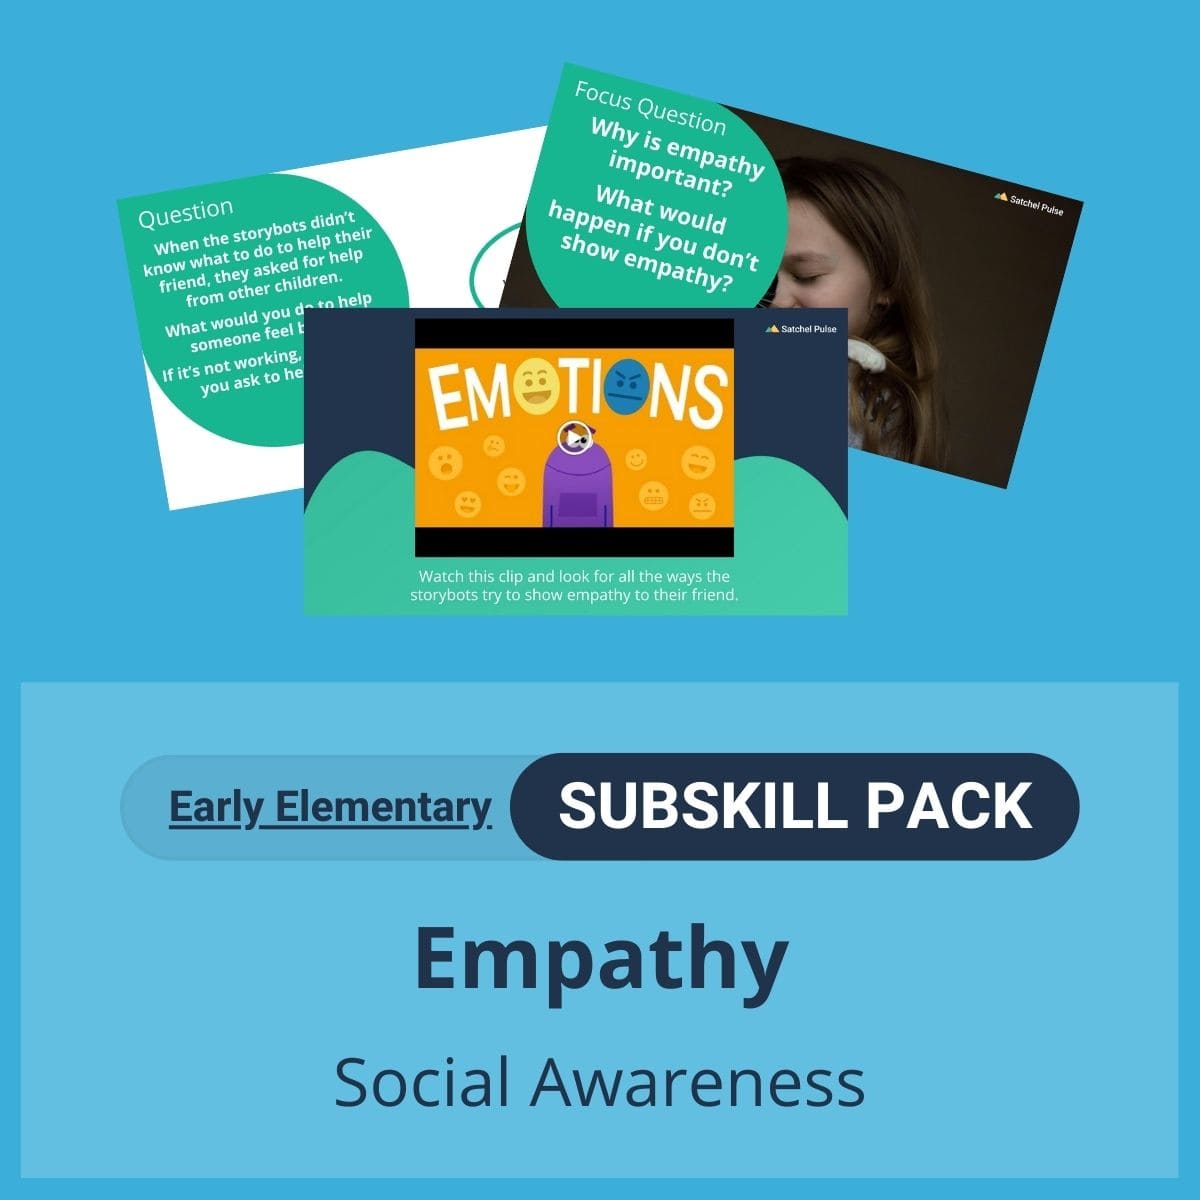 SEL Resource pack with social-emotional learning lessons and self-studies to help you teach Empathy in your classroom as a part of the SEL curriculum.